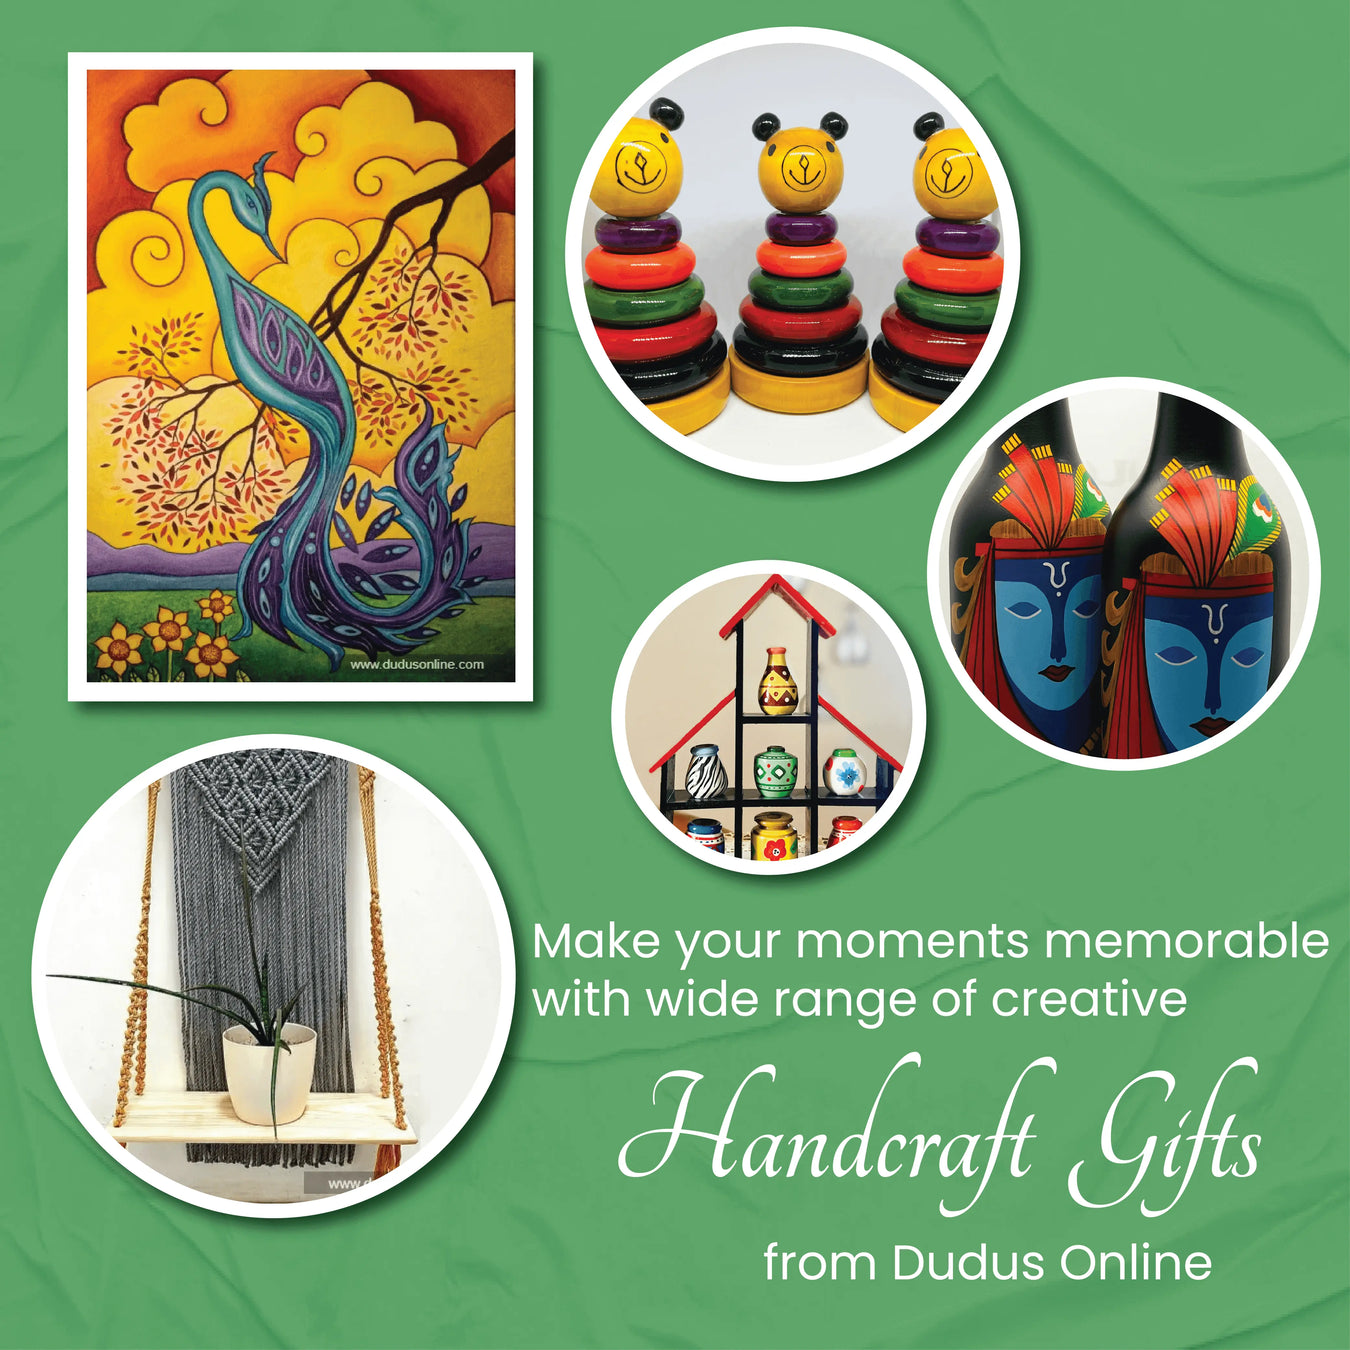 Shop handmade gifts and home decors at Dudus Online